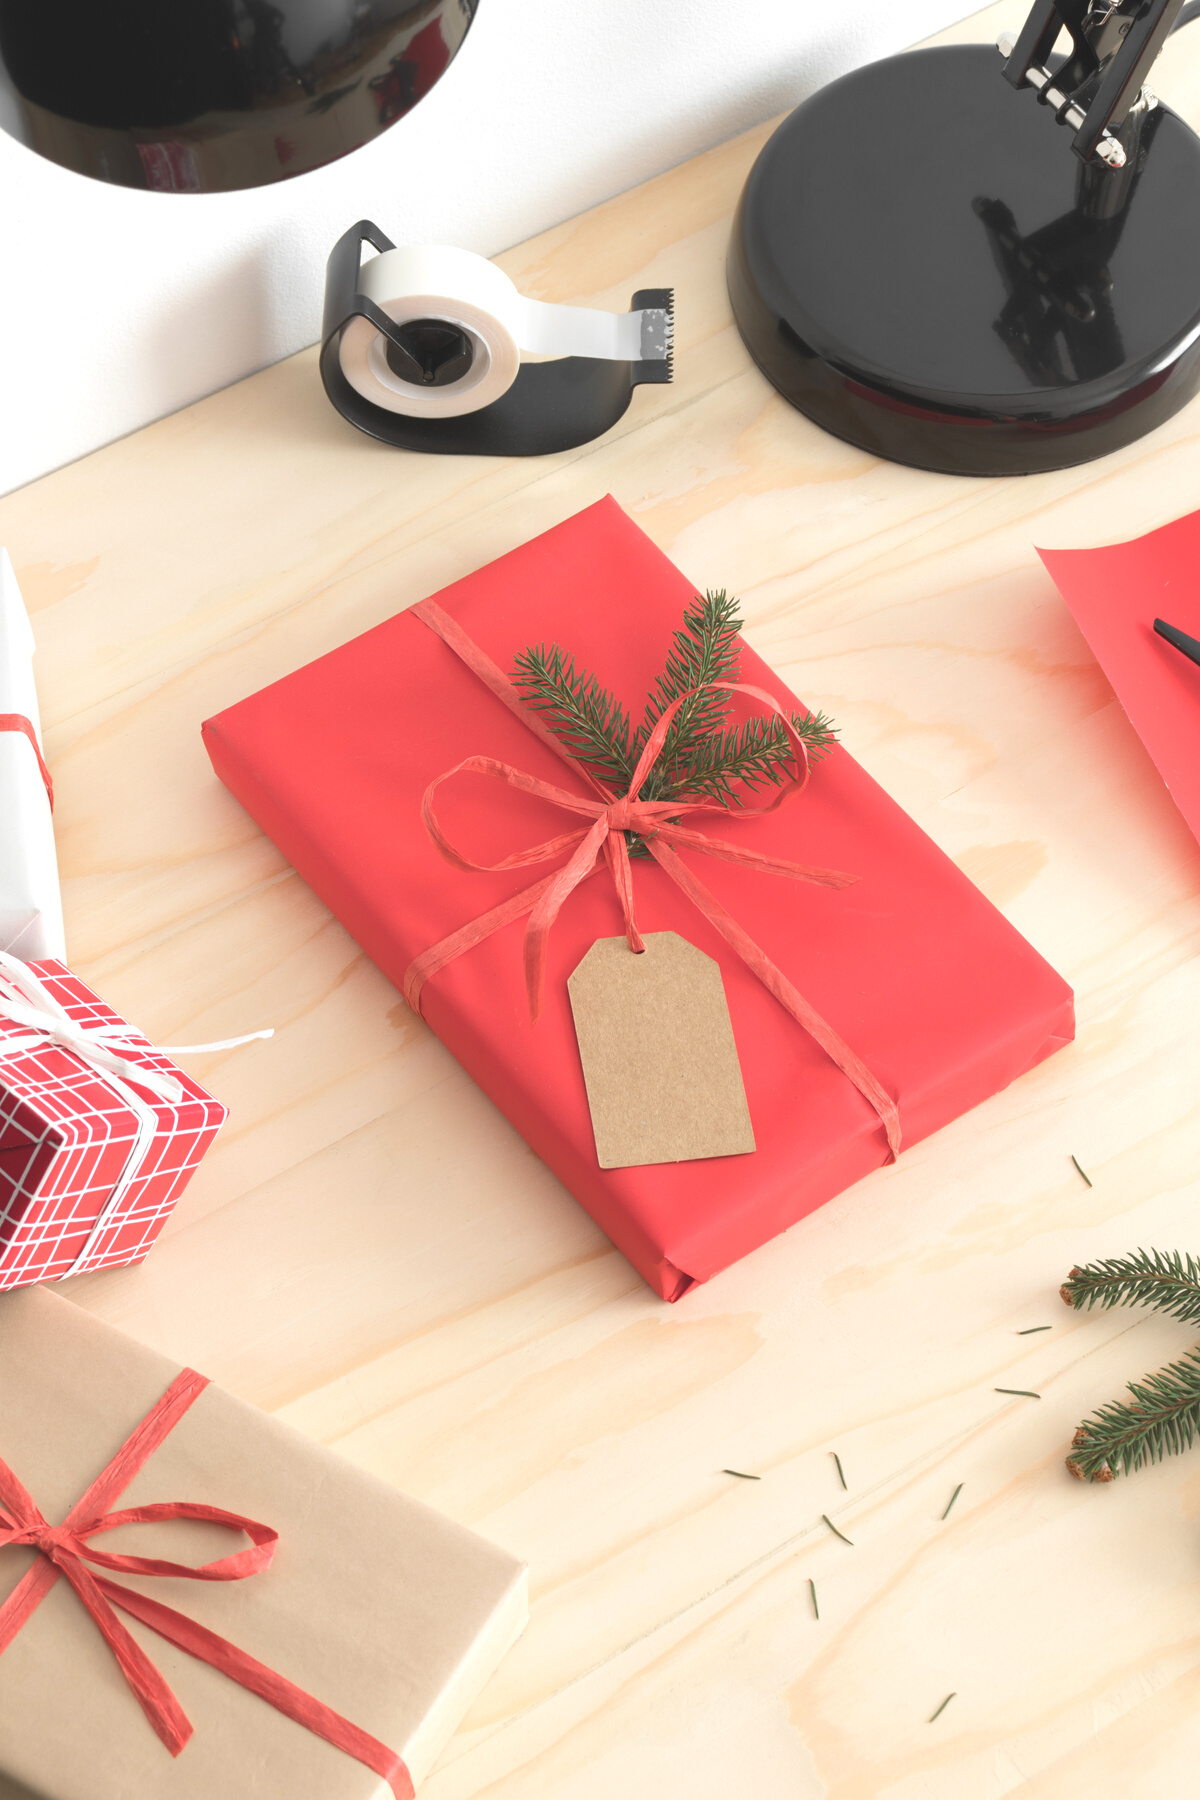 Red christmas gift with workspace accessories on a wooden table.